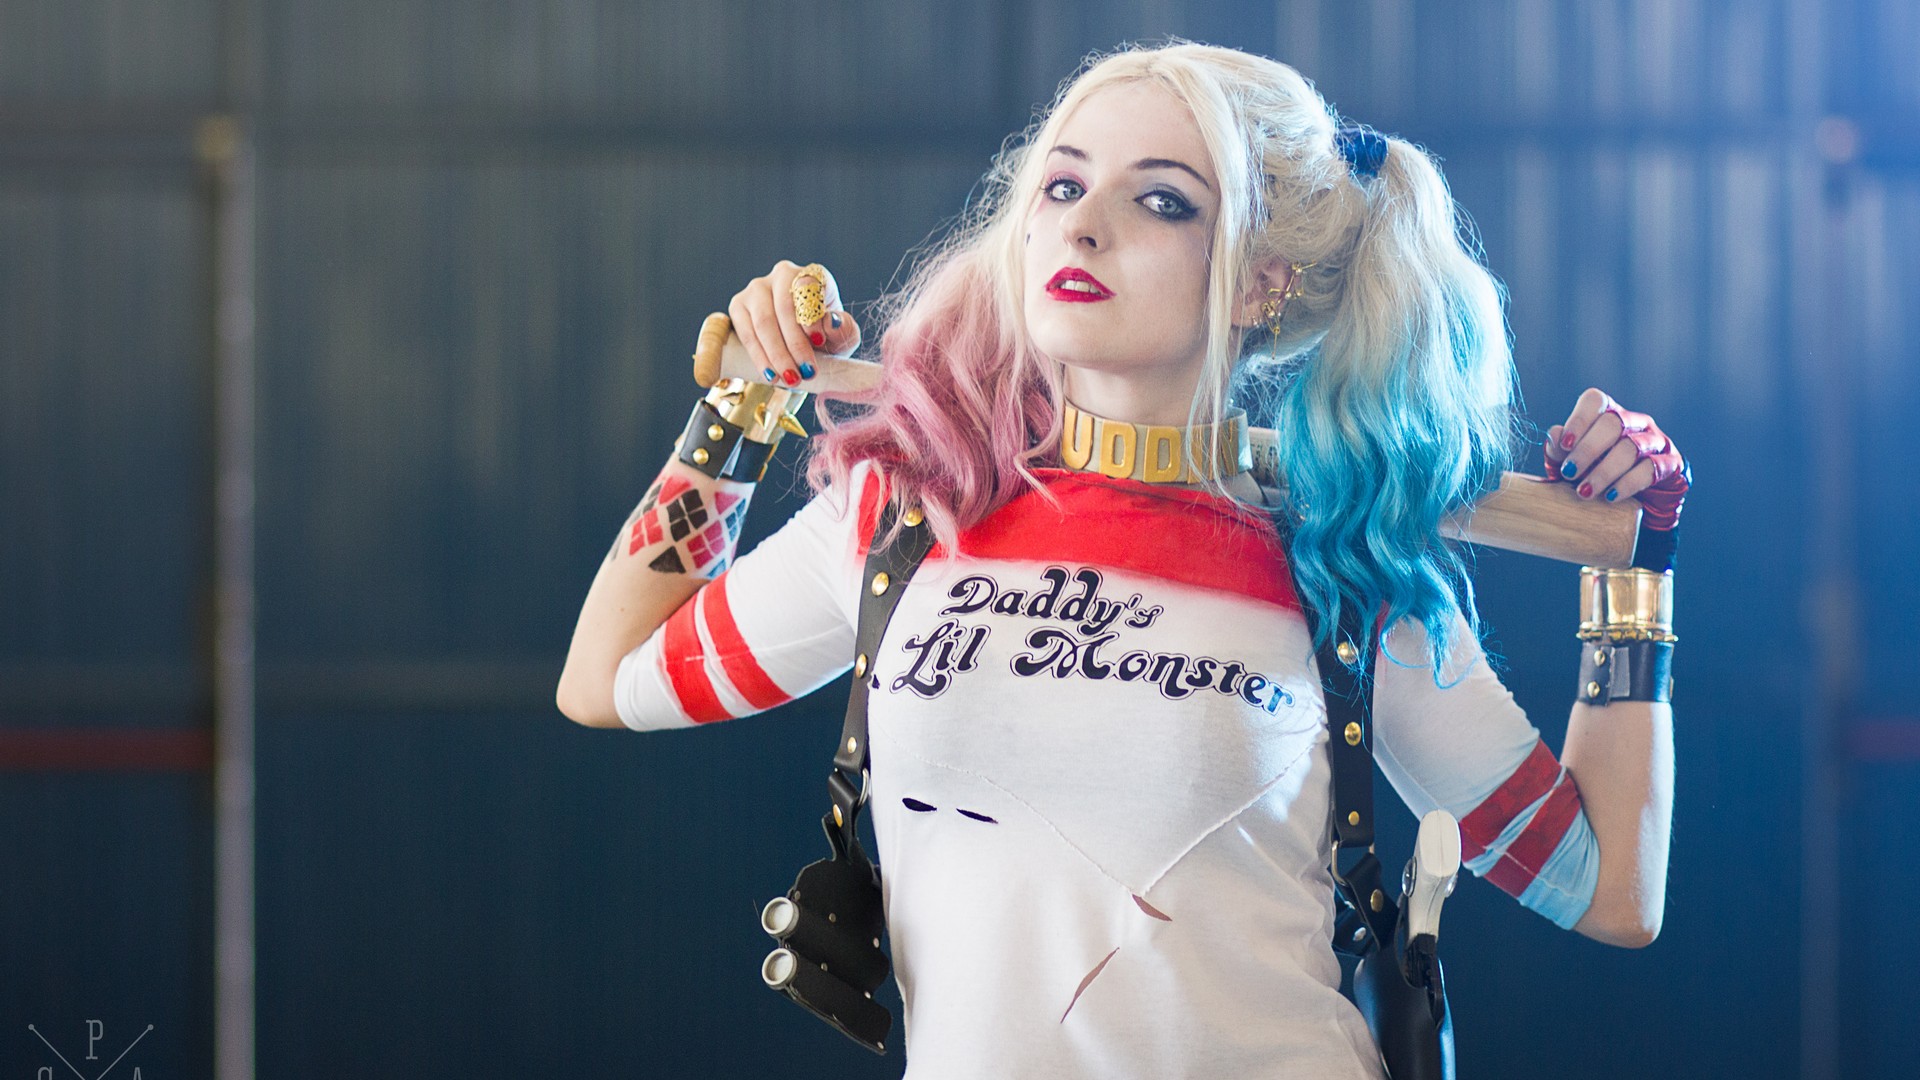 Pictures Of Harley Quinn HD Wallpaper with image resolution 1920x1080 pixel. You can make this wallpaper for your Desktop Computer Backgrounds, Mac Wallpapers, Android Lock screen or iPhone Screensavers